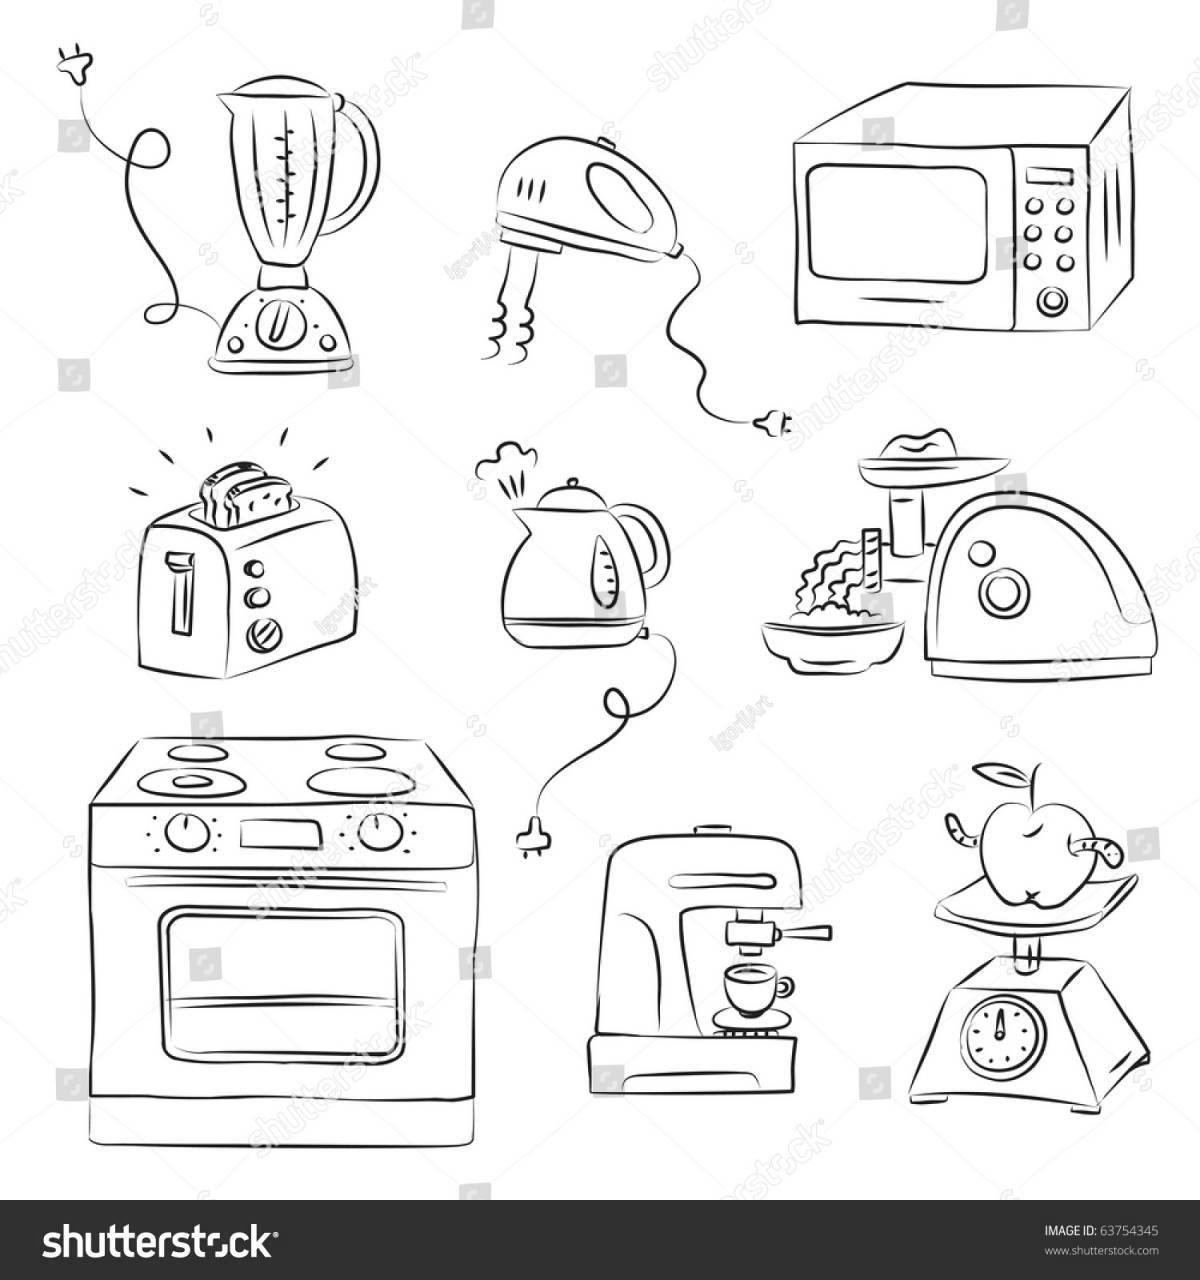 Bold appliances coloring page